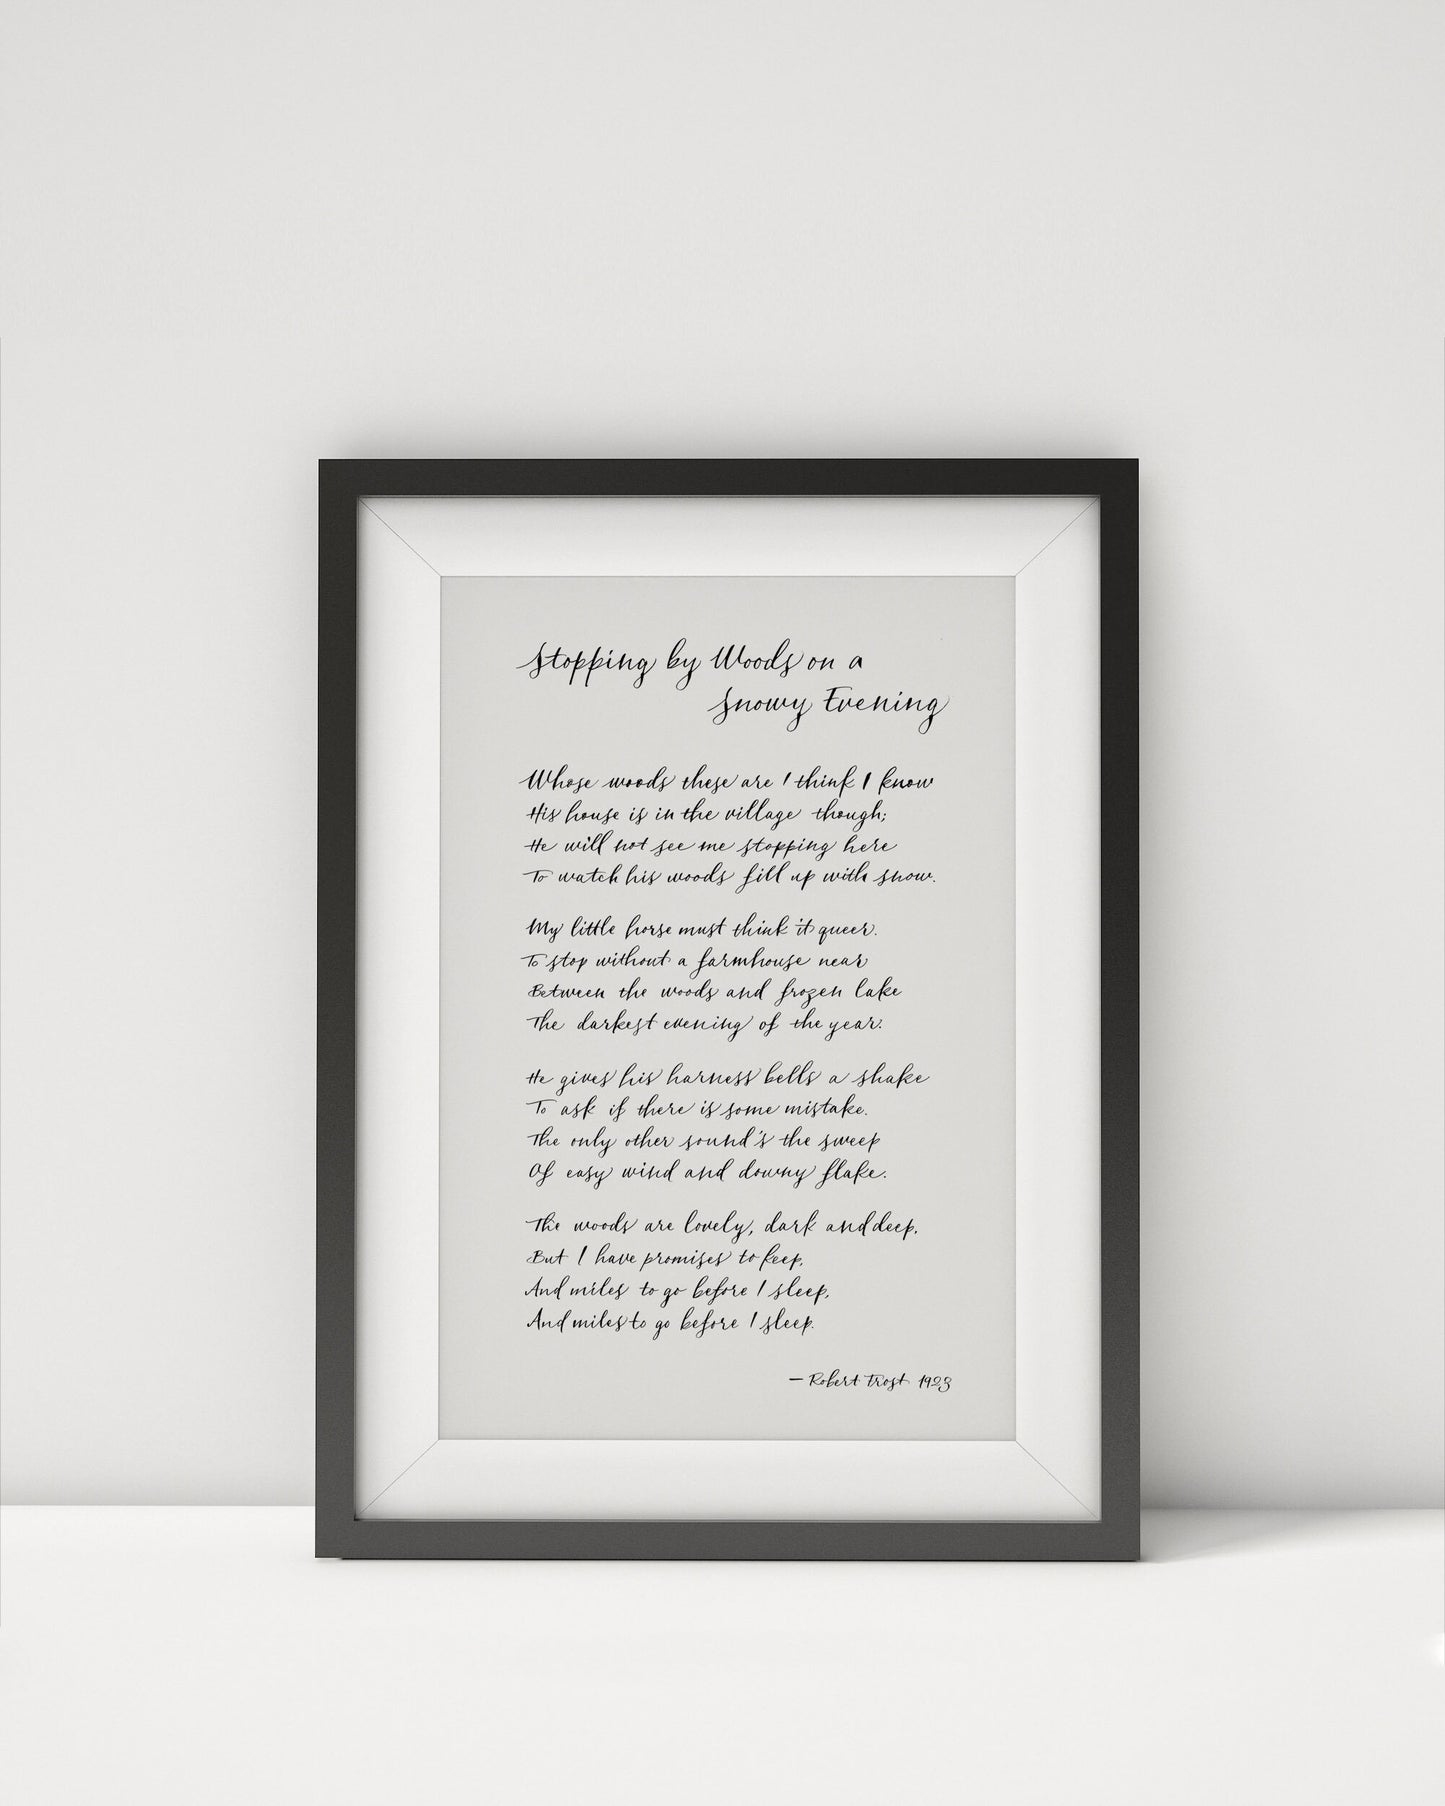 Stopping by woods on a snowy evening - Robert Frost - Framed - Poem Calligraphy Print - Black and White Home decor - Framed Poster